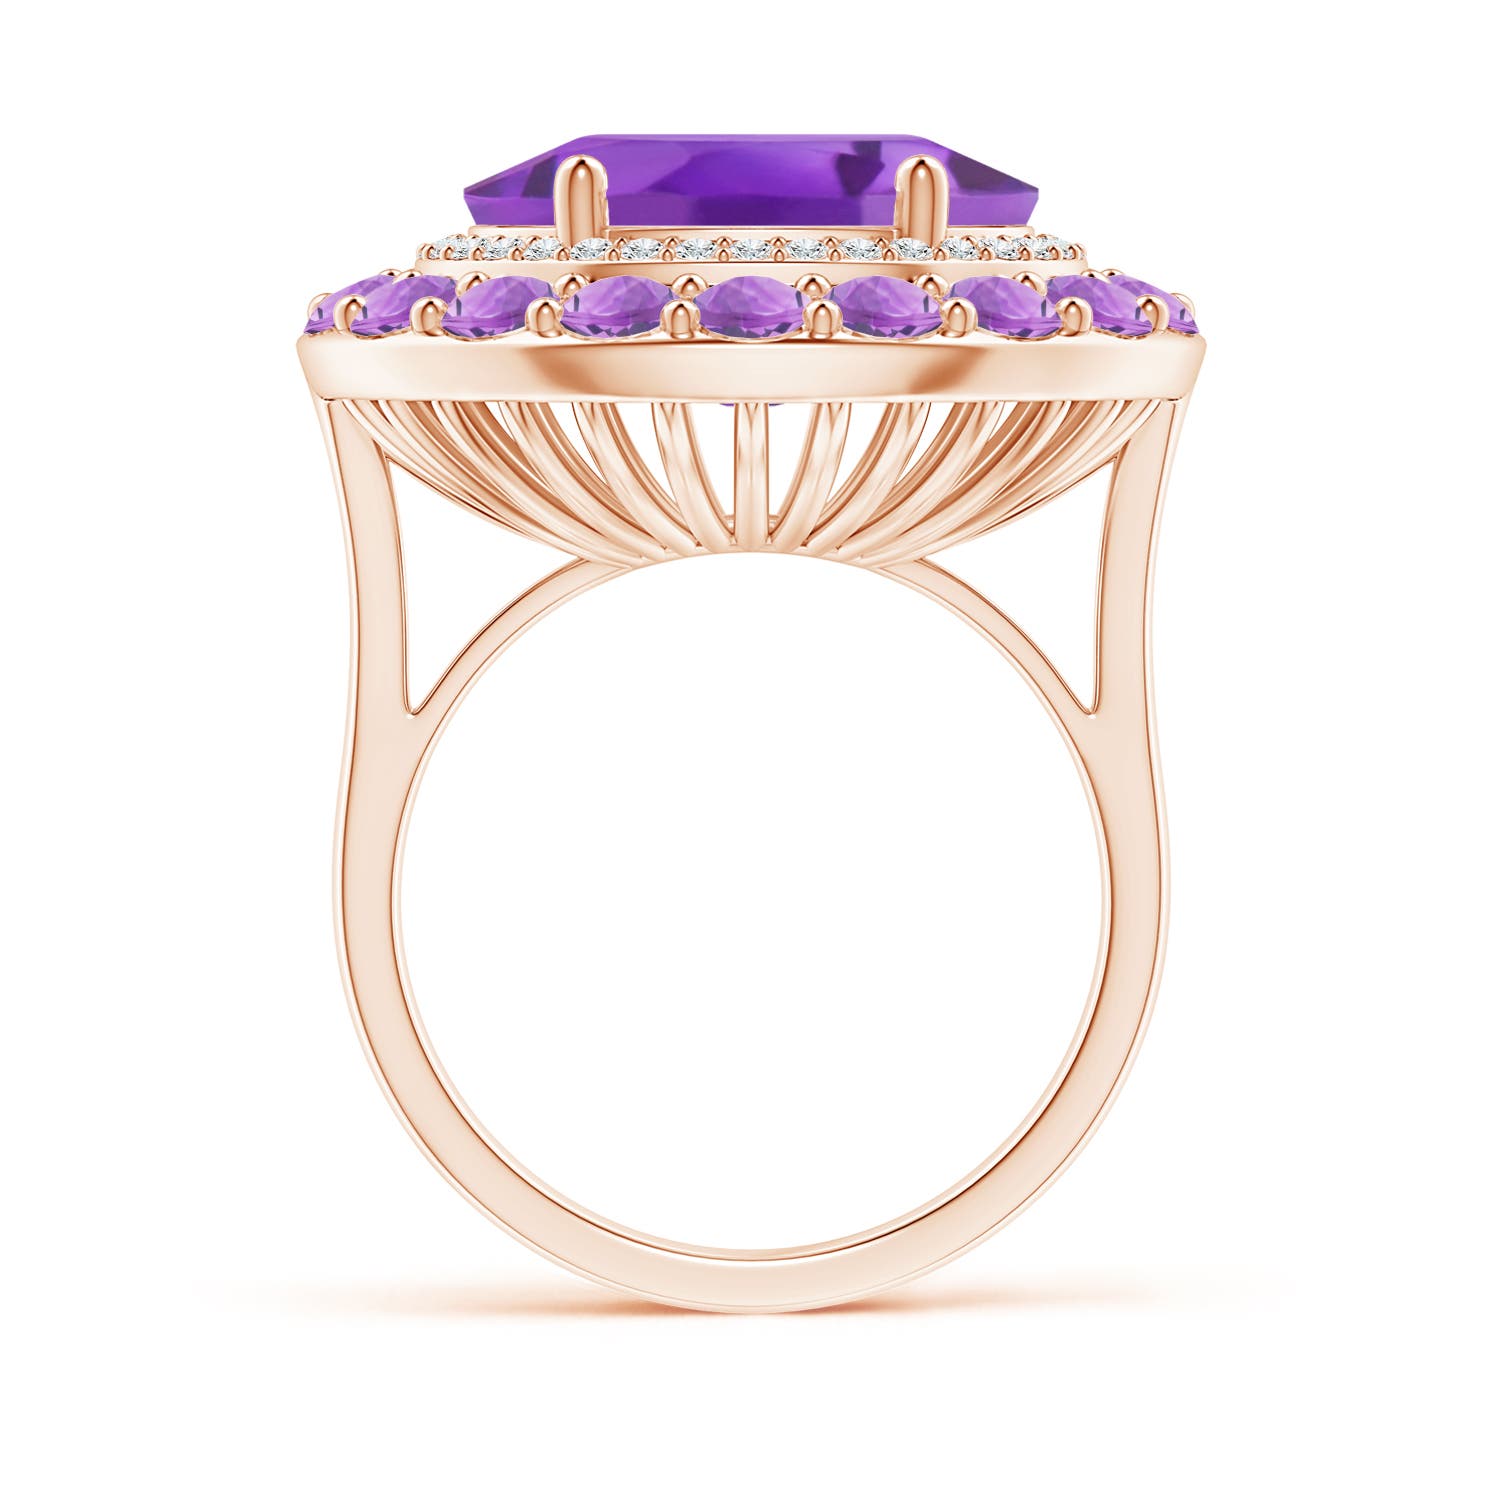 AA - Amethyst / 8.52 CT / 14 KT Rose Gold